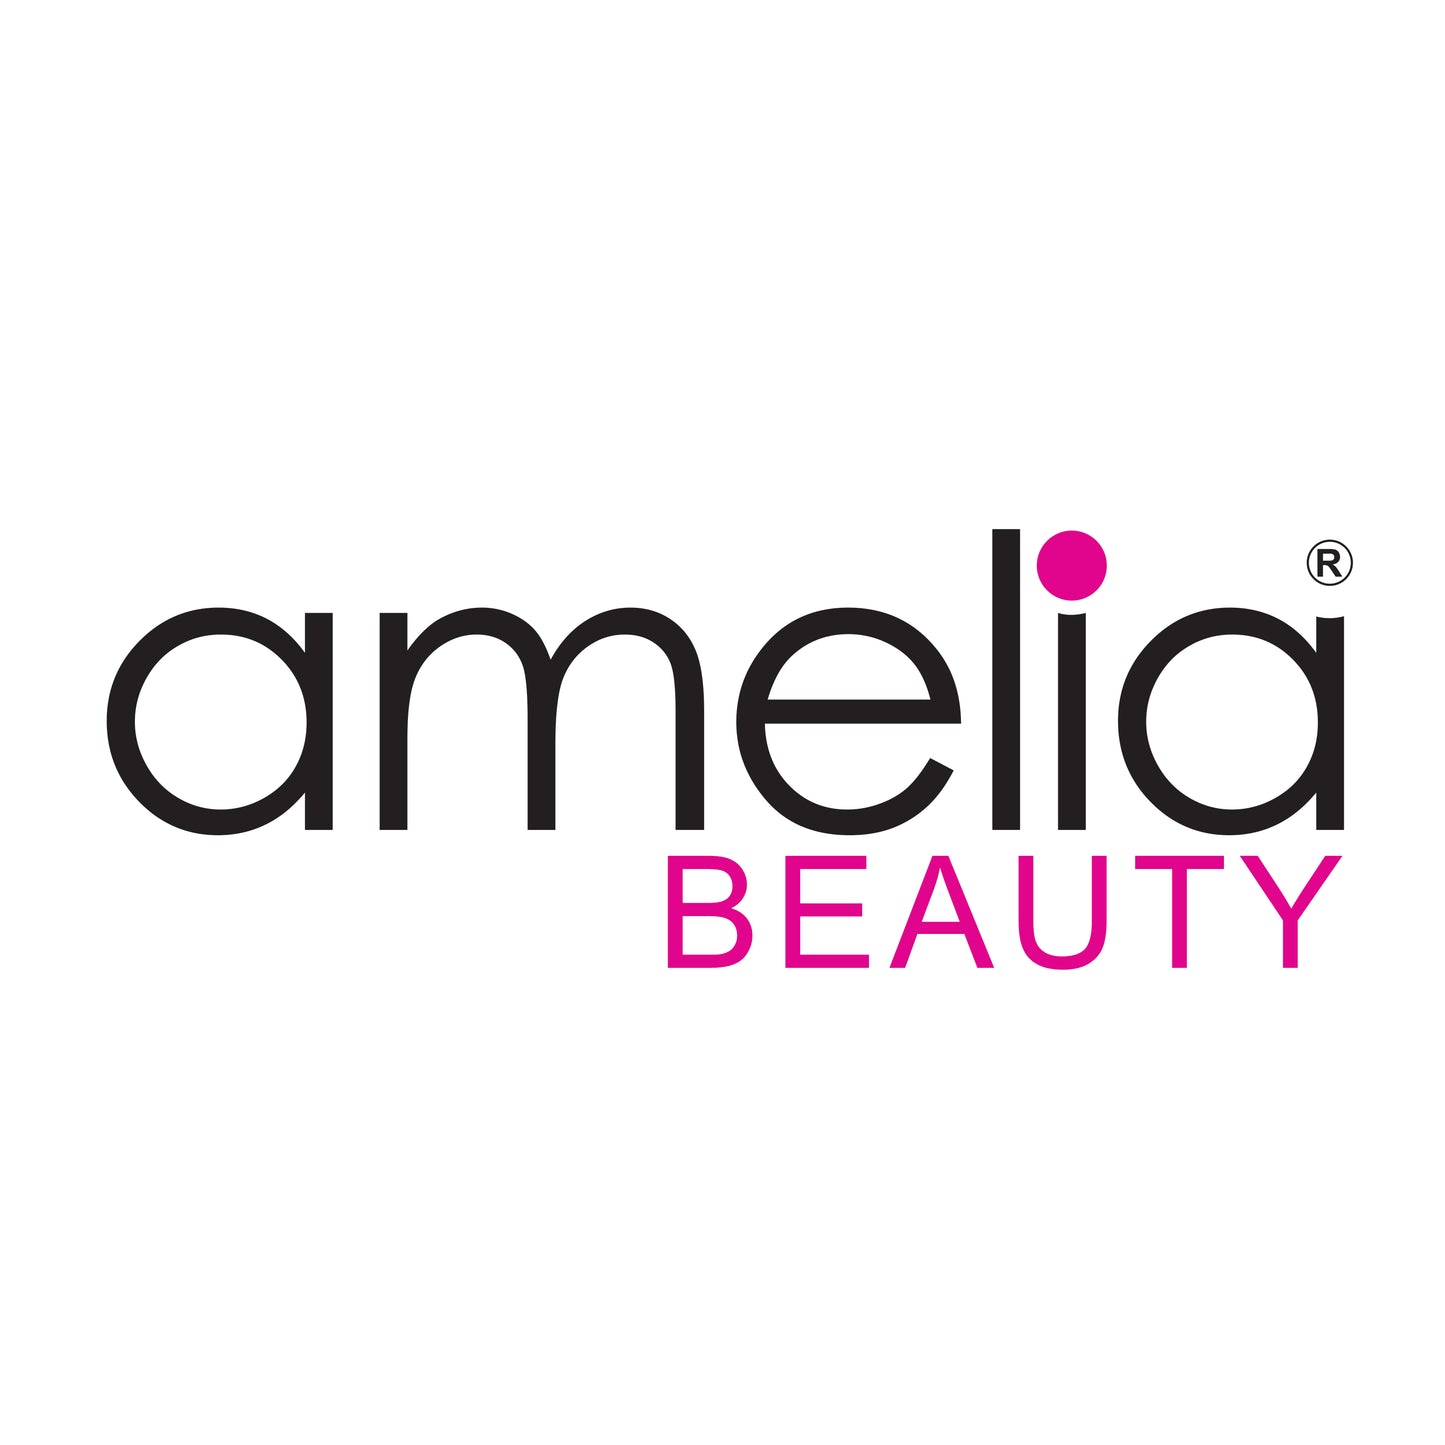 Amelia Beauty Products 8 Large Smooth Elastic Hair Coils, 2. 5in Diameter Thick Spiral Hair Ties, Gentle on Hair, Strong Hold and Minimizes Dents and Creases, Brown